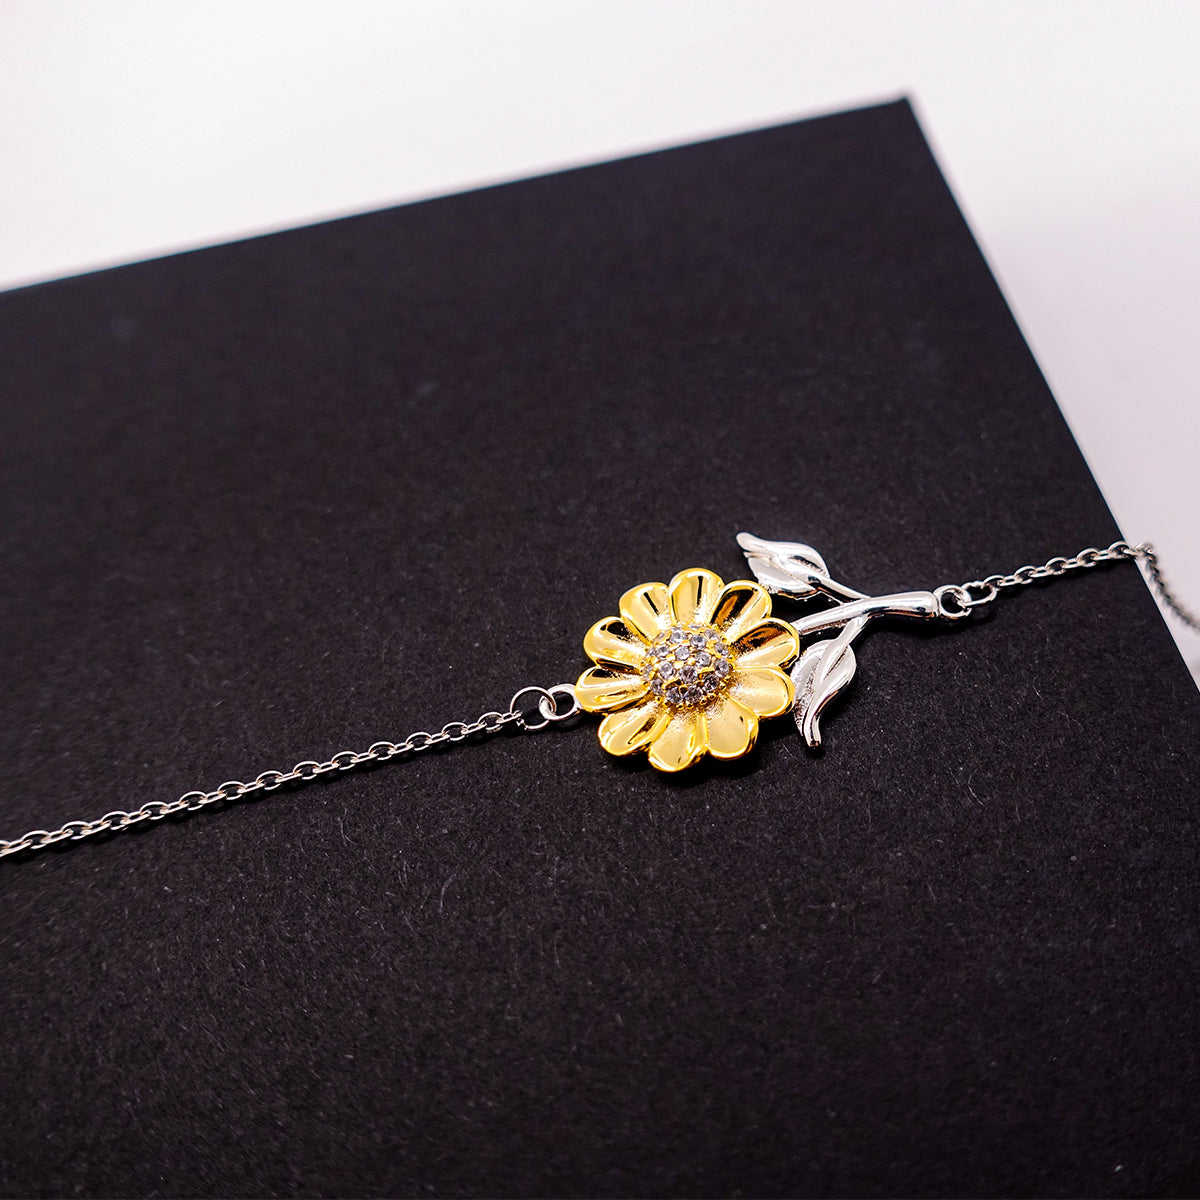 Bestie Sunflower Bracelet - Engraved Friendship Gift for Her, You will always have a special place in my heart, Meaningful Jewelry for Birthday, Christmas, and Graduation, Bestie, Best Friend, BFF